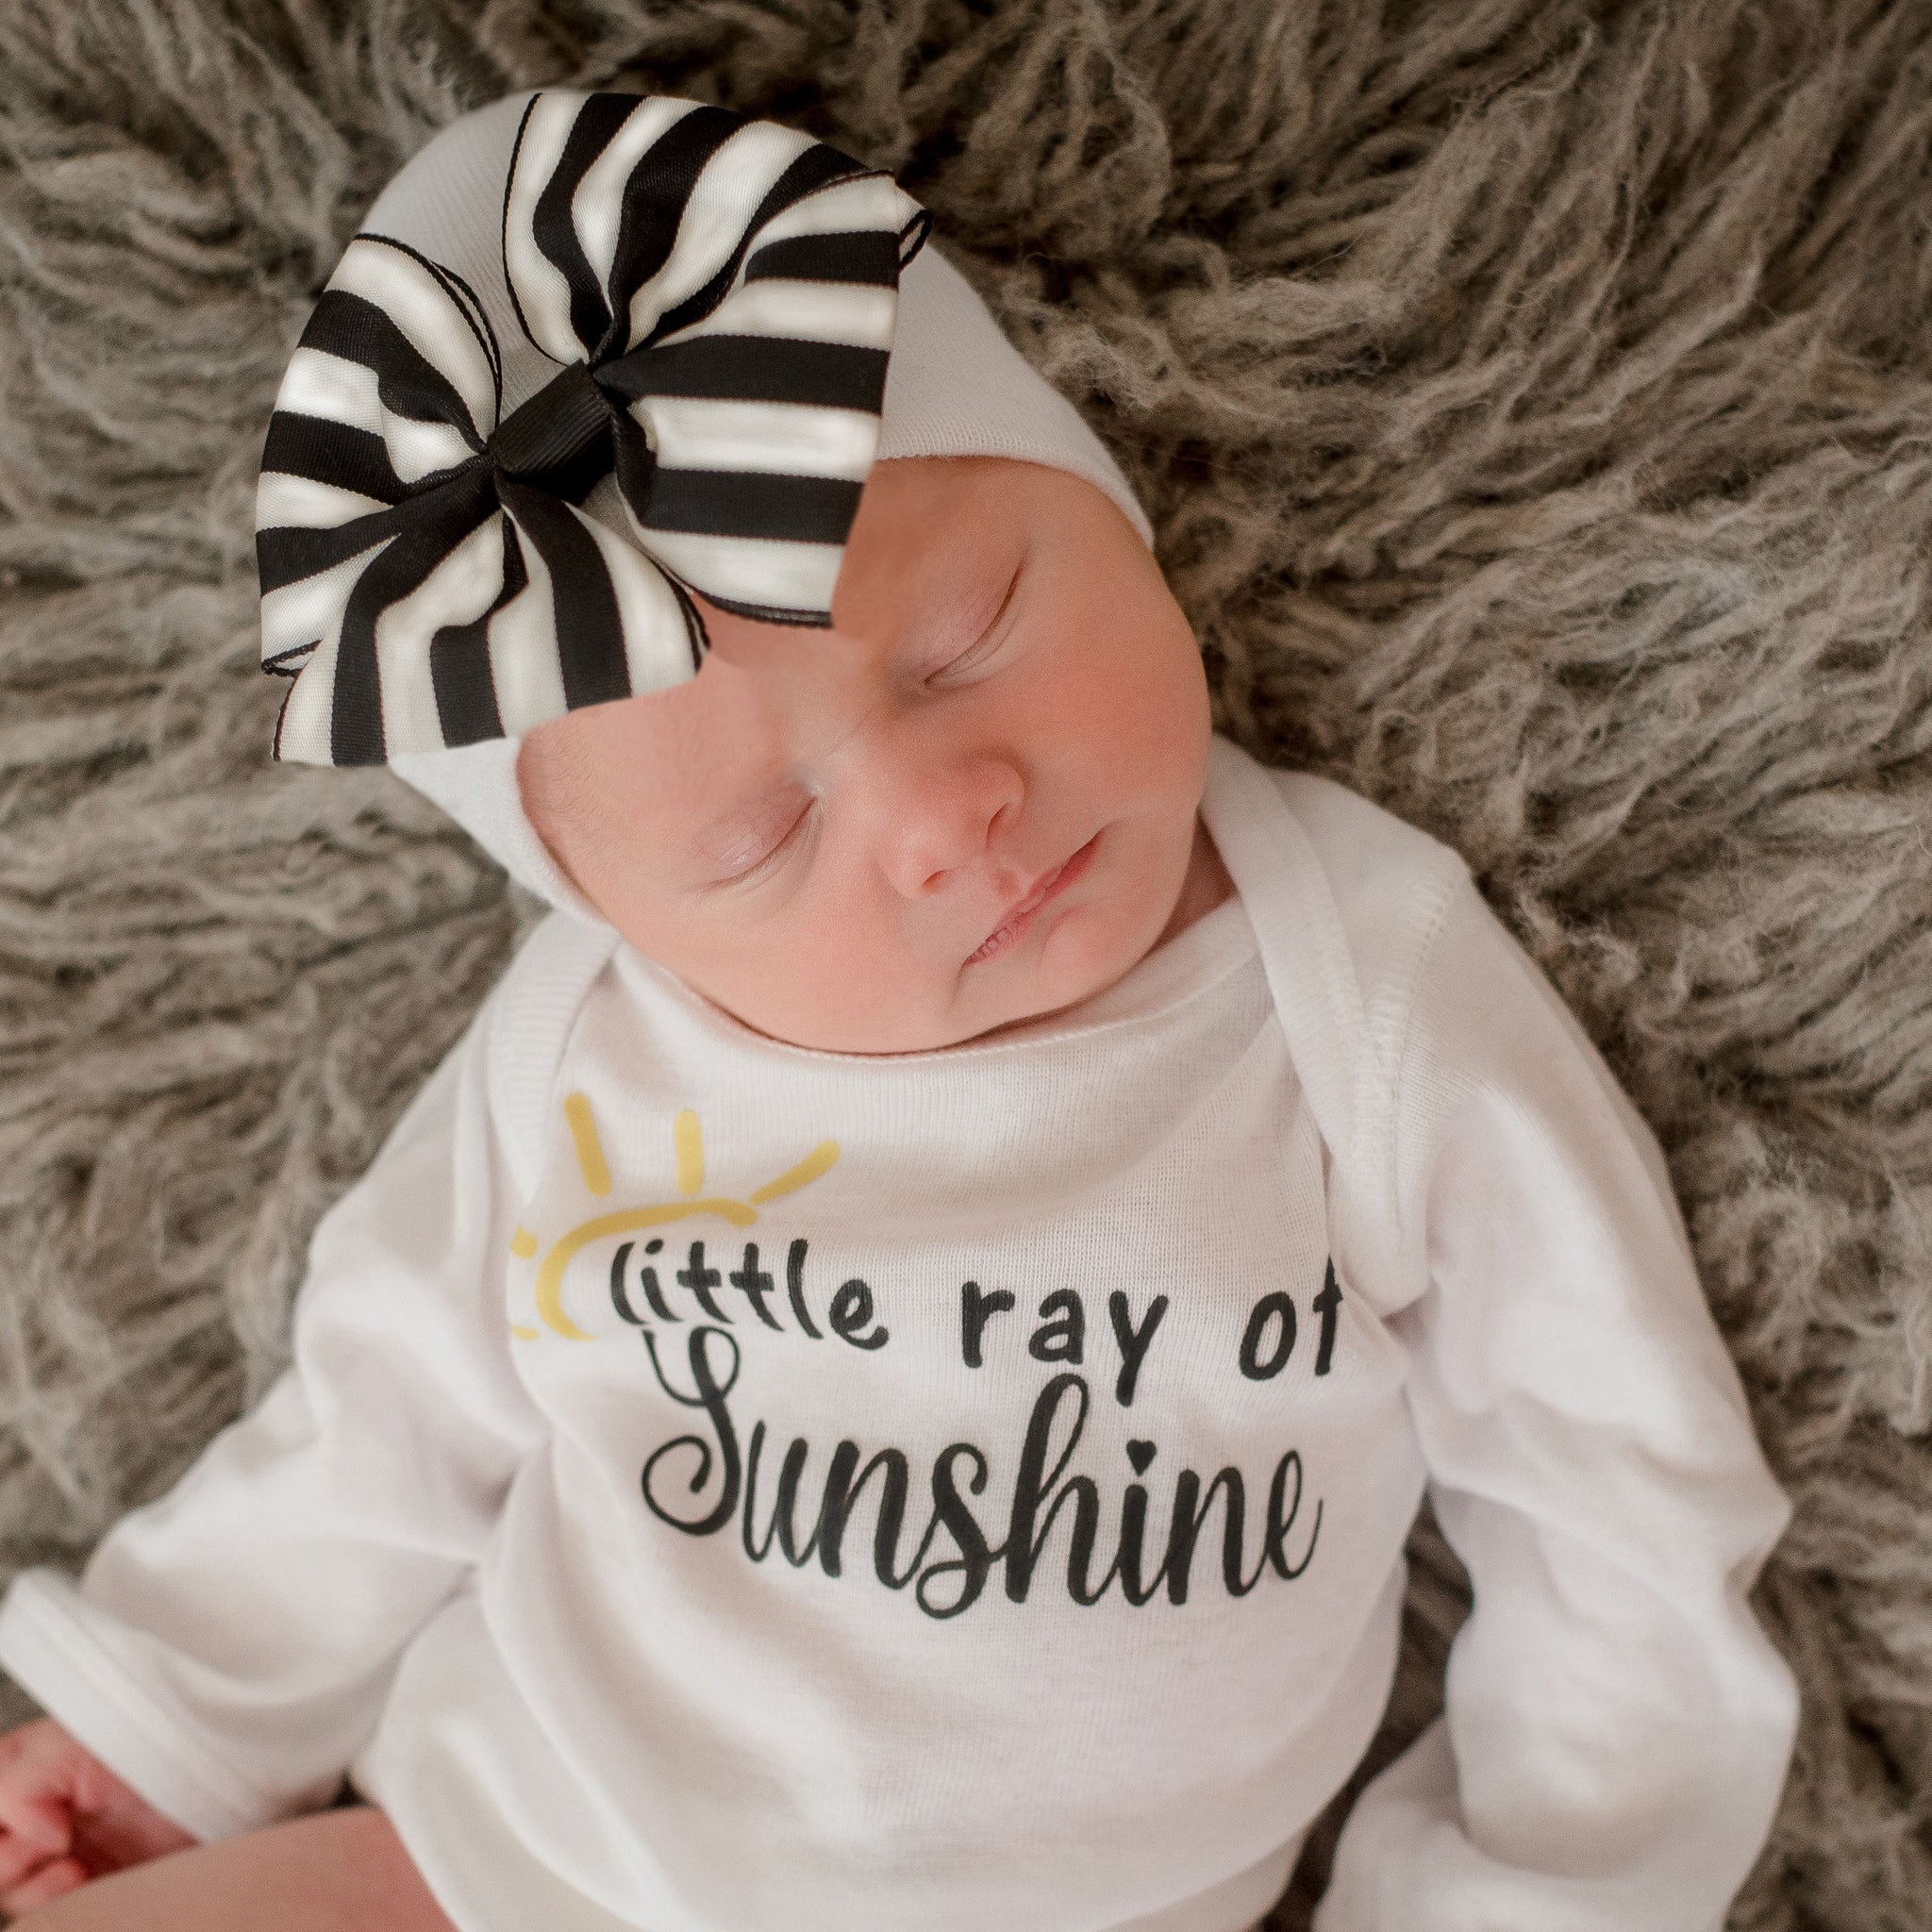 Newborn Girl Coming Home Outfit Baby Girl Clothes Newborn Girl 